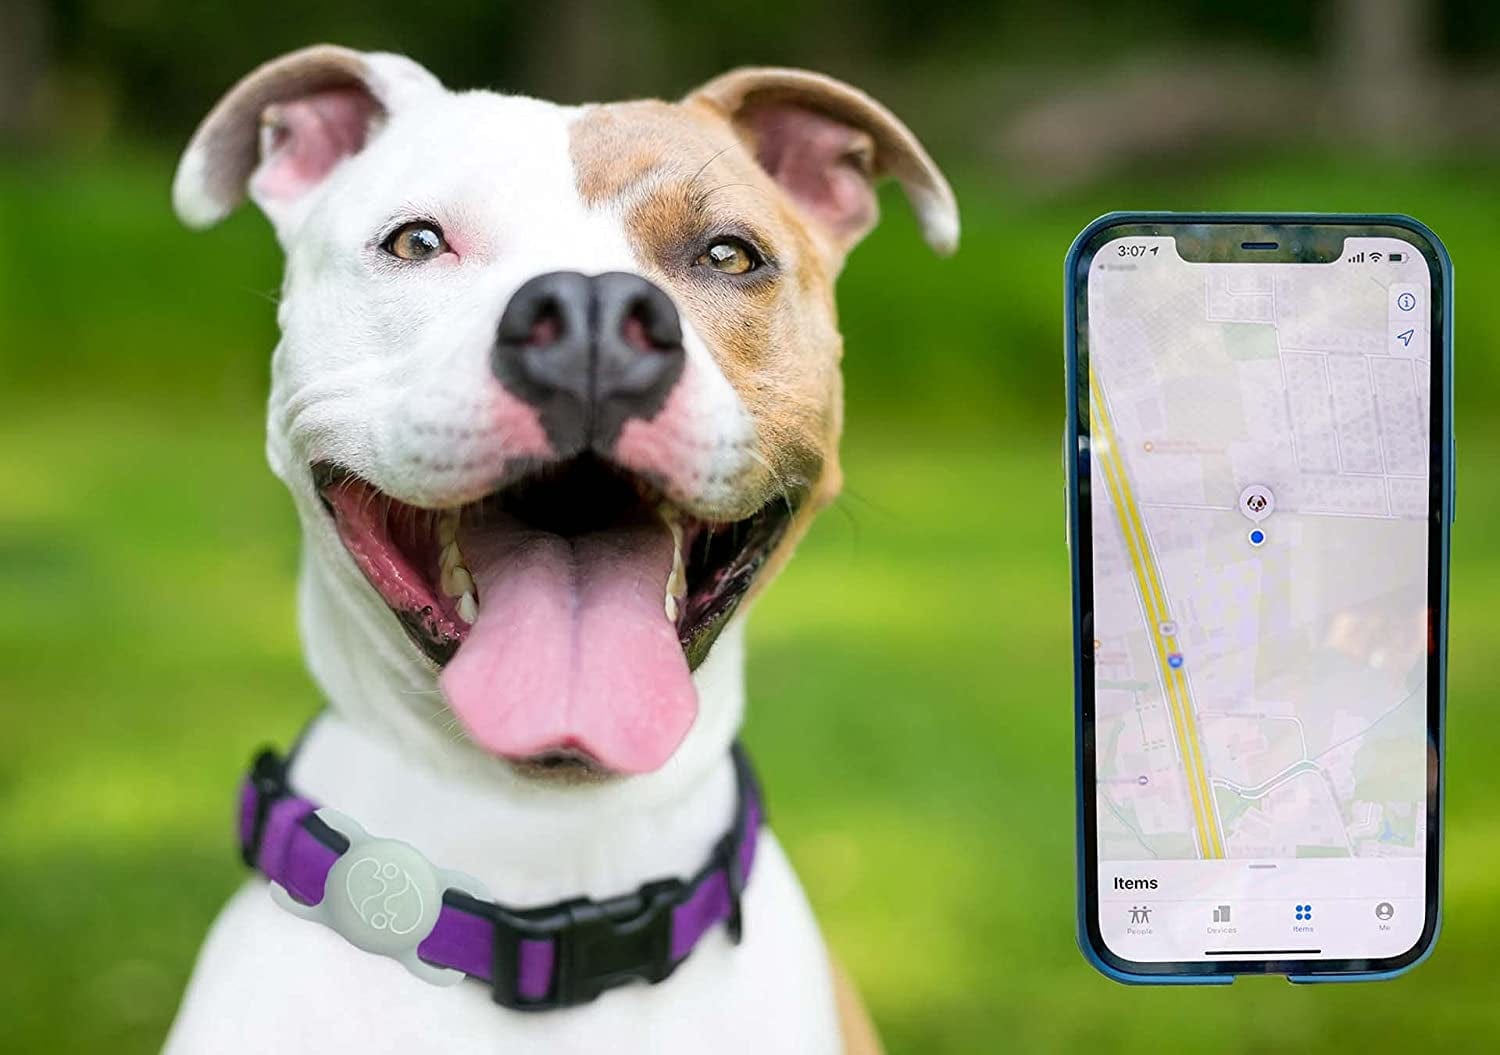 Abiwares Apple Airtag Case for Pets 2Pk Glow in the Dark Apple Airtag Case - Airtag Case for Collars, Backpacks, Luggage Anything with a Strap - GPS Tracker Case - Dogs Cats Pets Tracker Holder